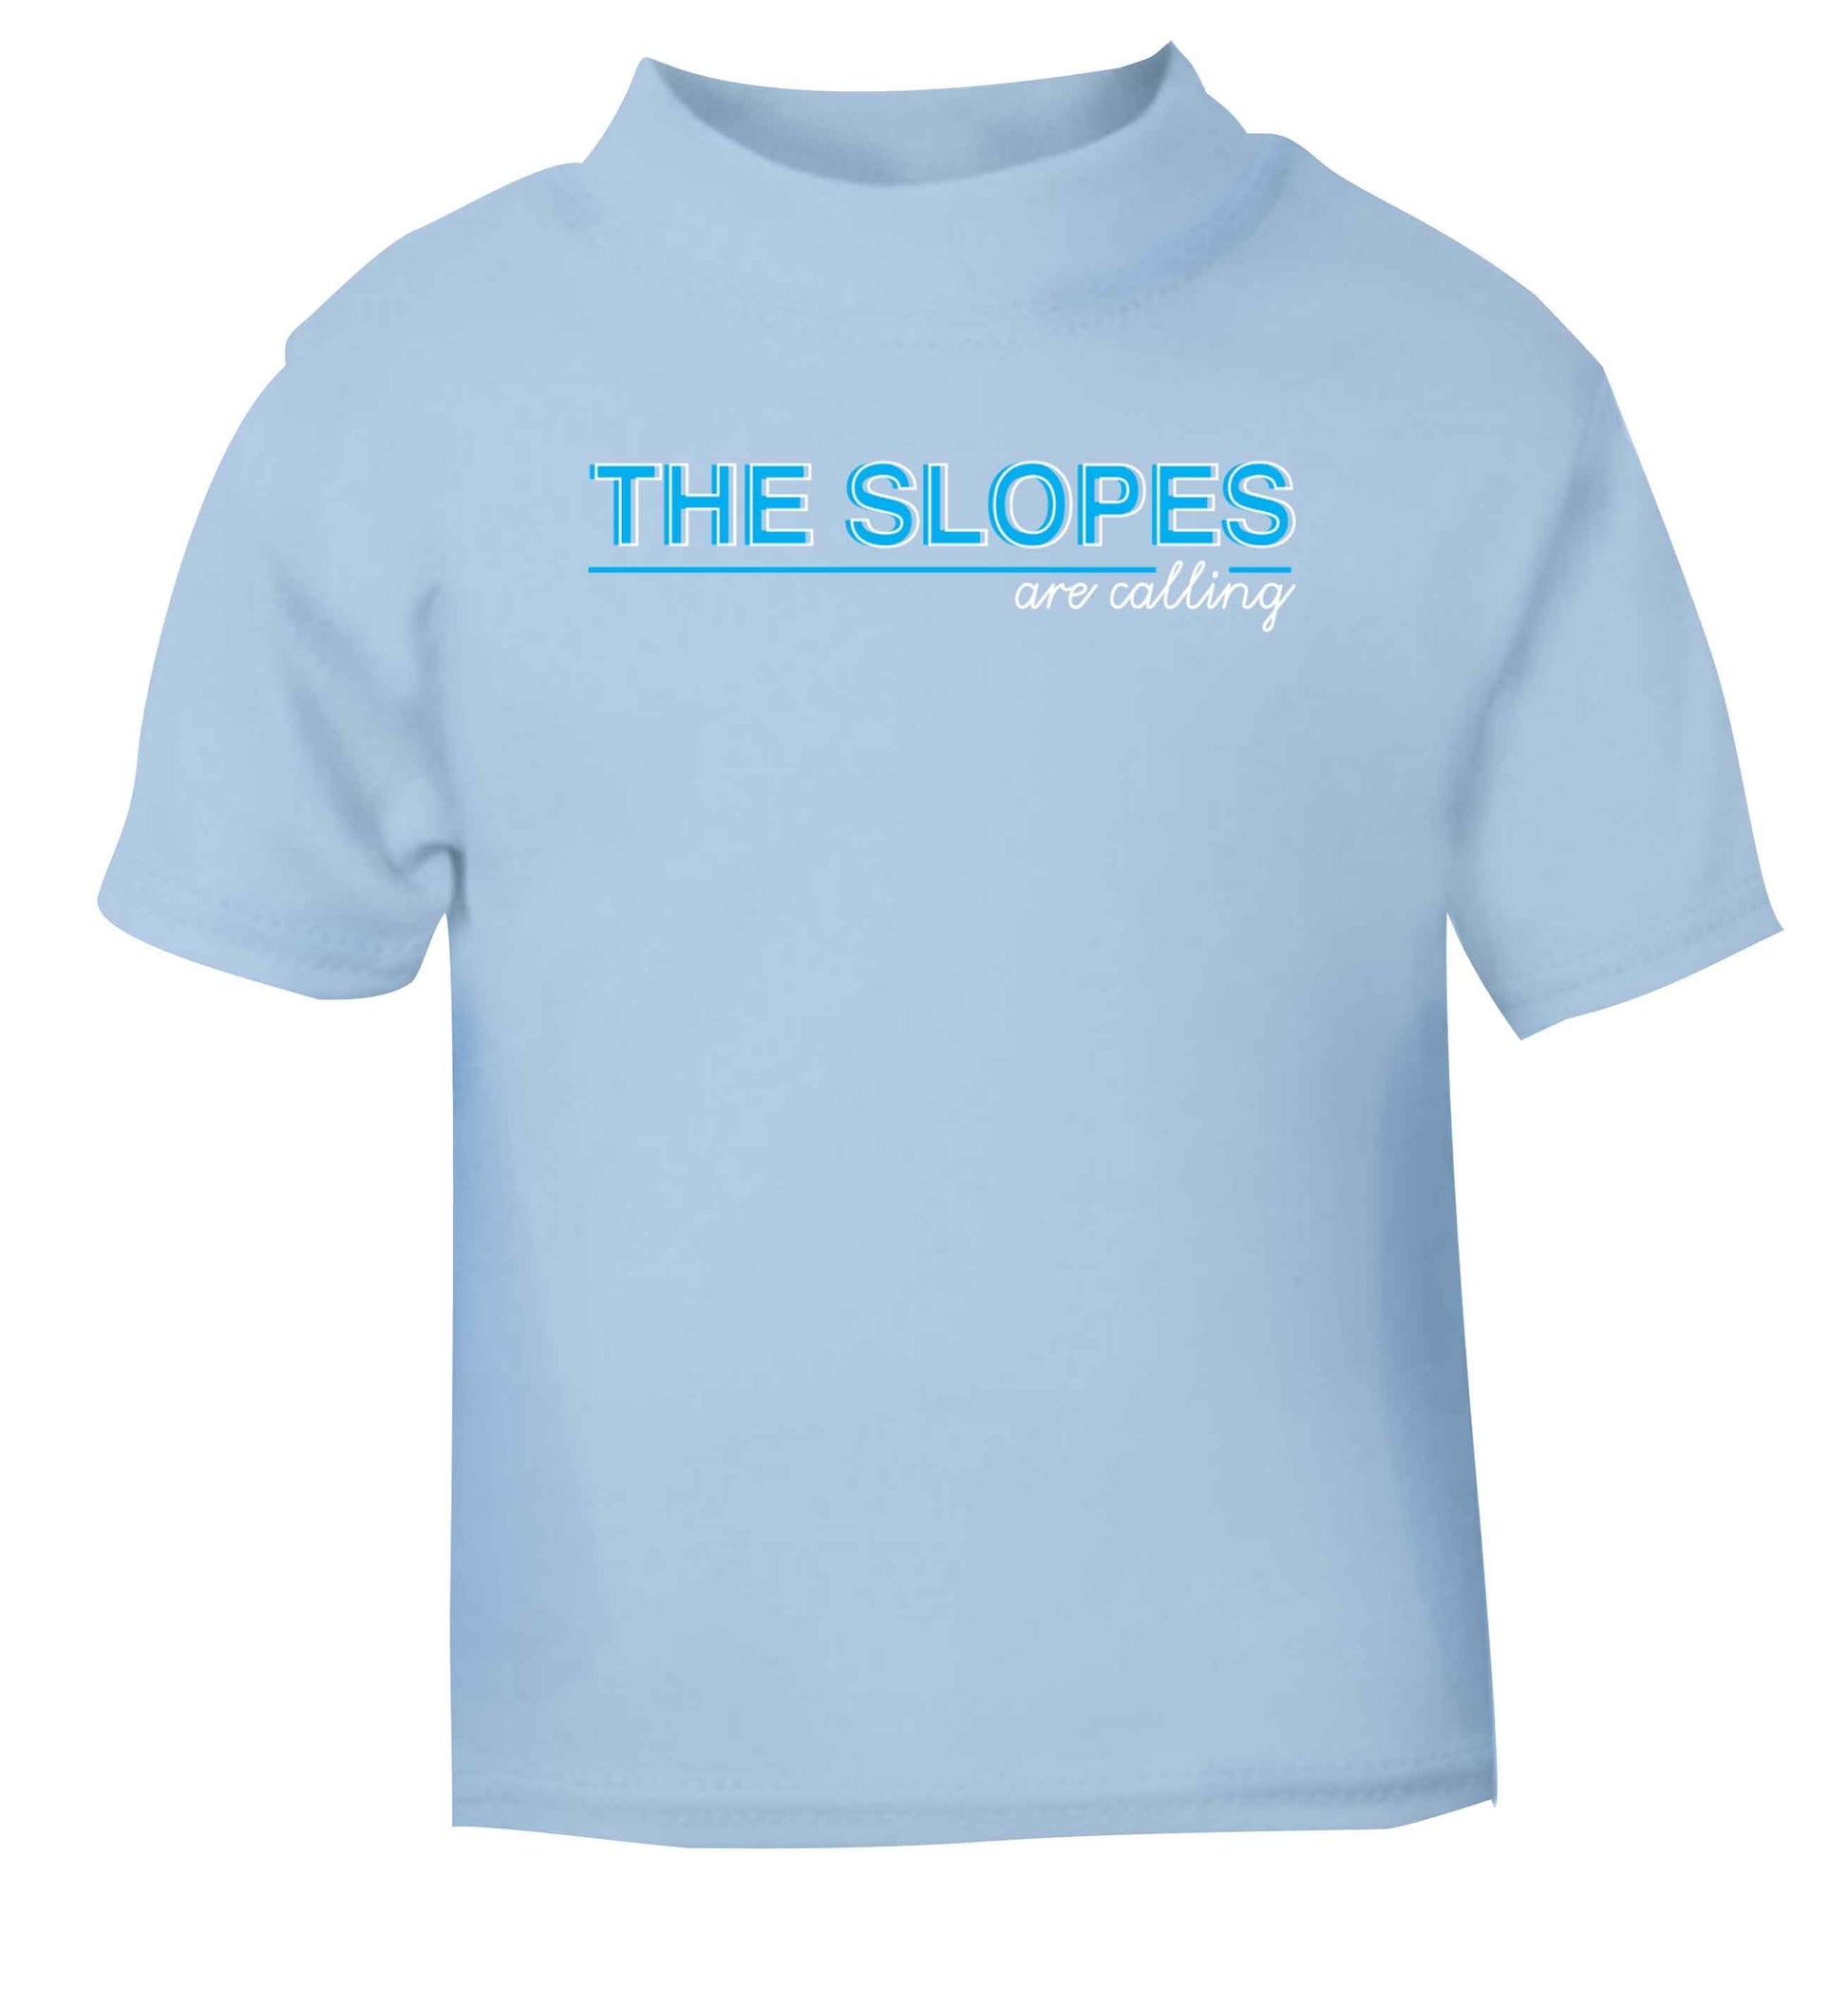 The slopes are calling light blue Baby Toddler Tshirt 2 Years